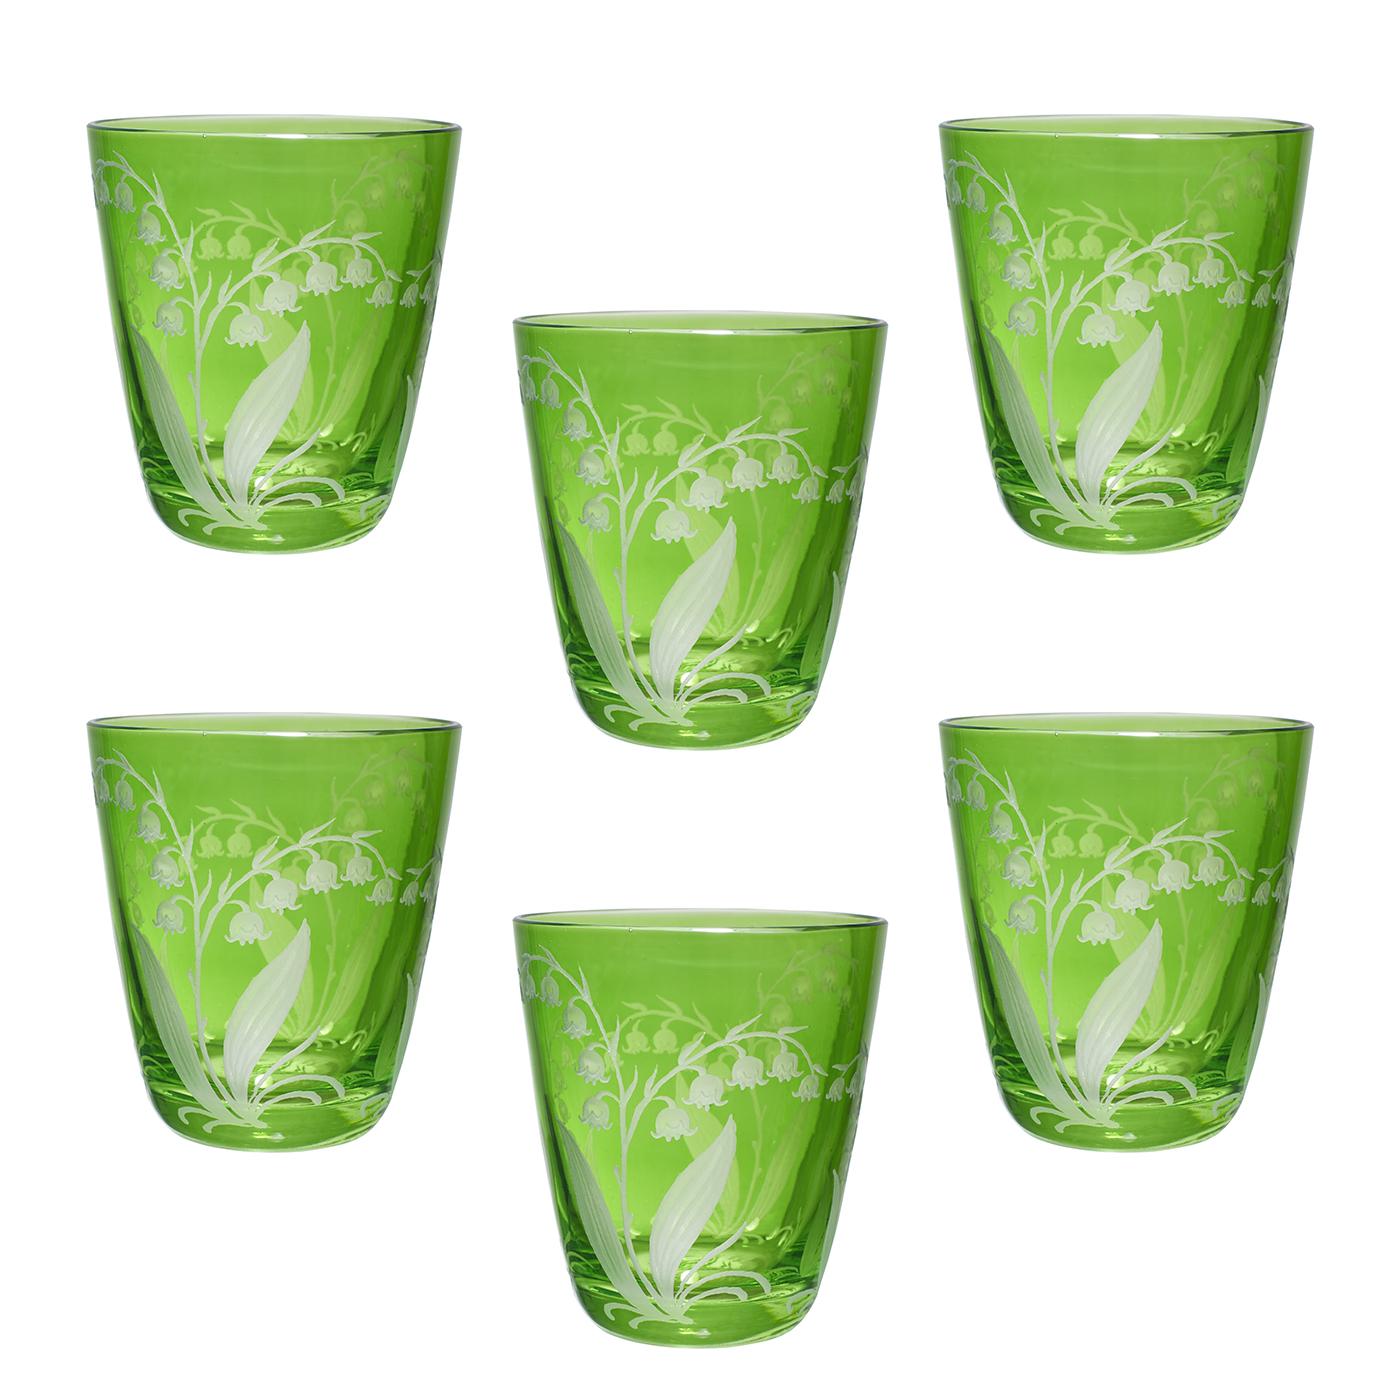 Set of 6 hand blown tumblers in green crystal with a country style lily of the valley decor all around. A matching carafe can be ordered in addition. Can be ordered in different colors like blue, pink and green. Not recommend for dishwasher